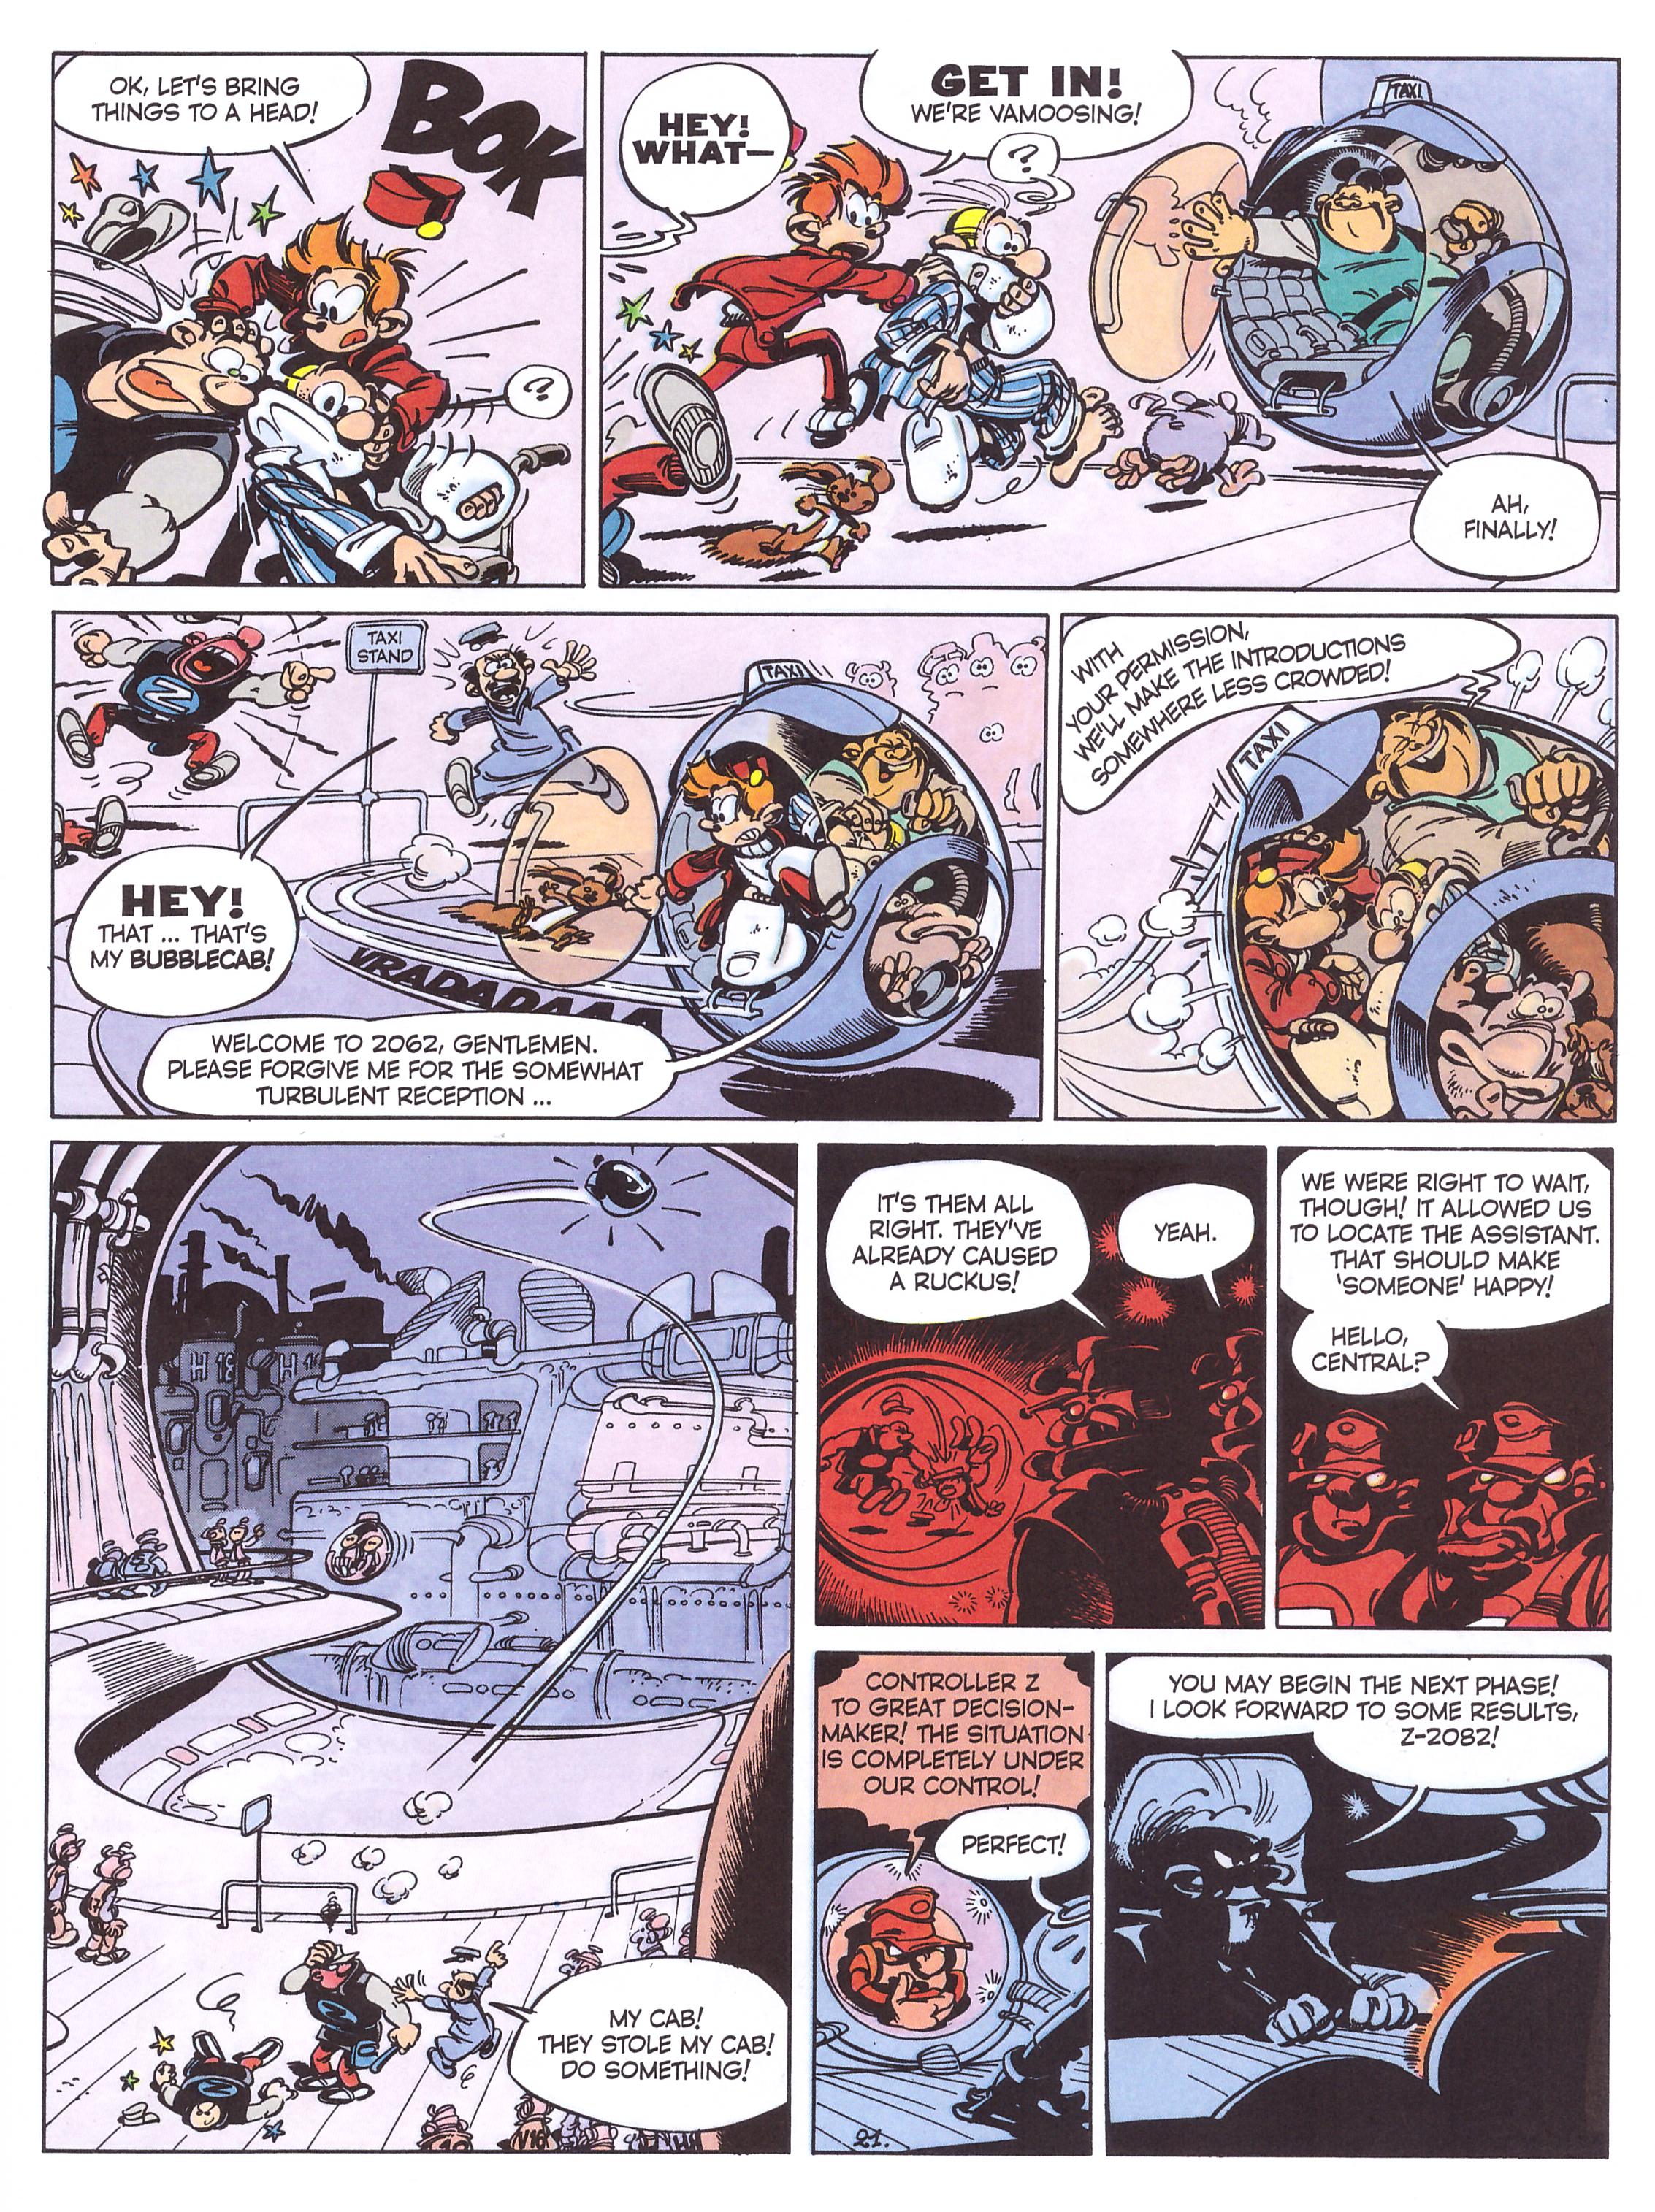 Spirou and Fantasio The Z Rises Again review